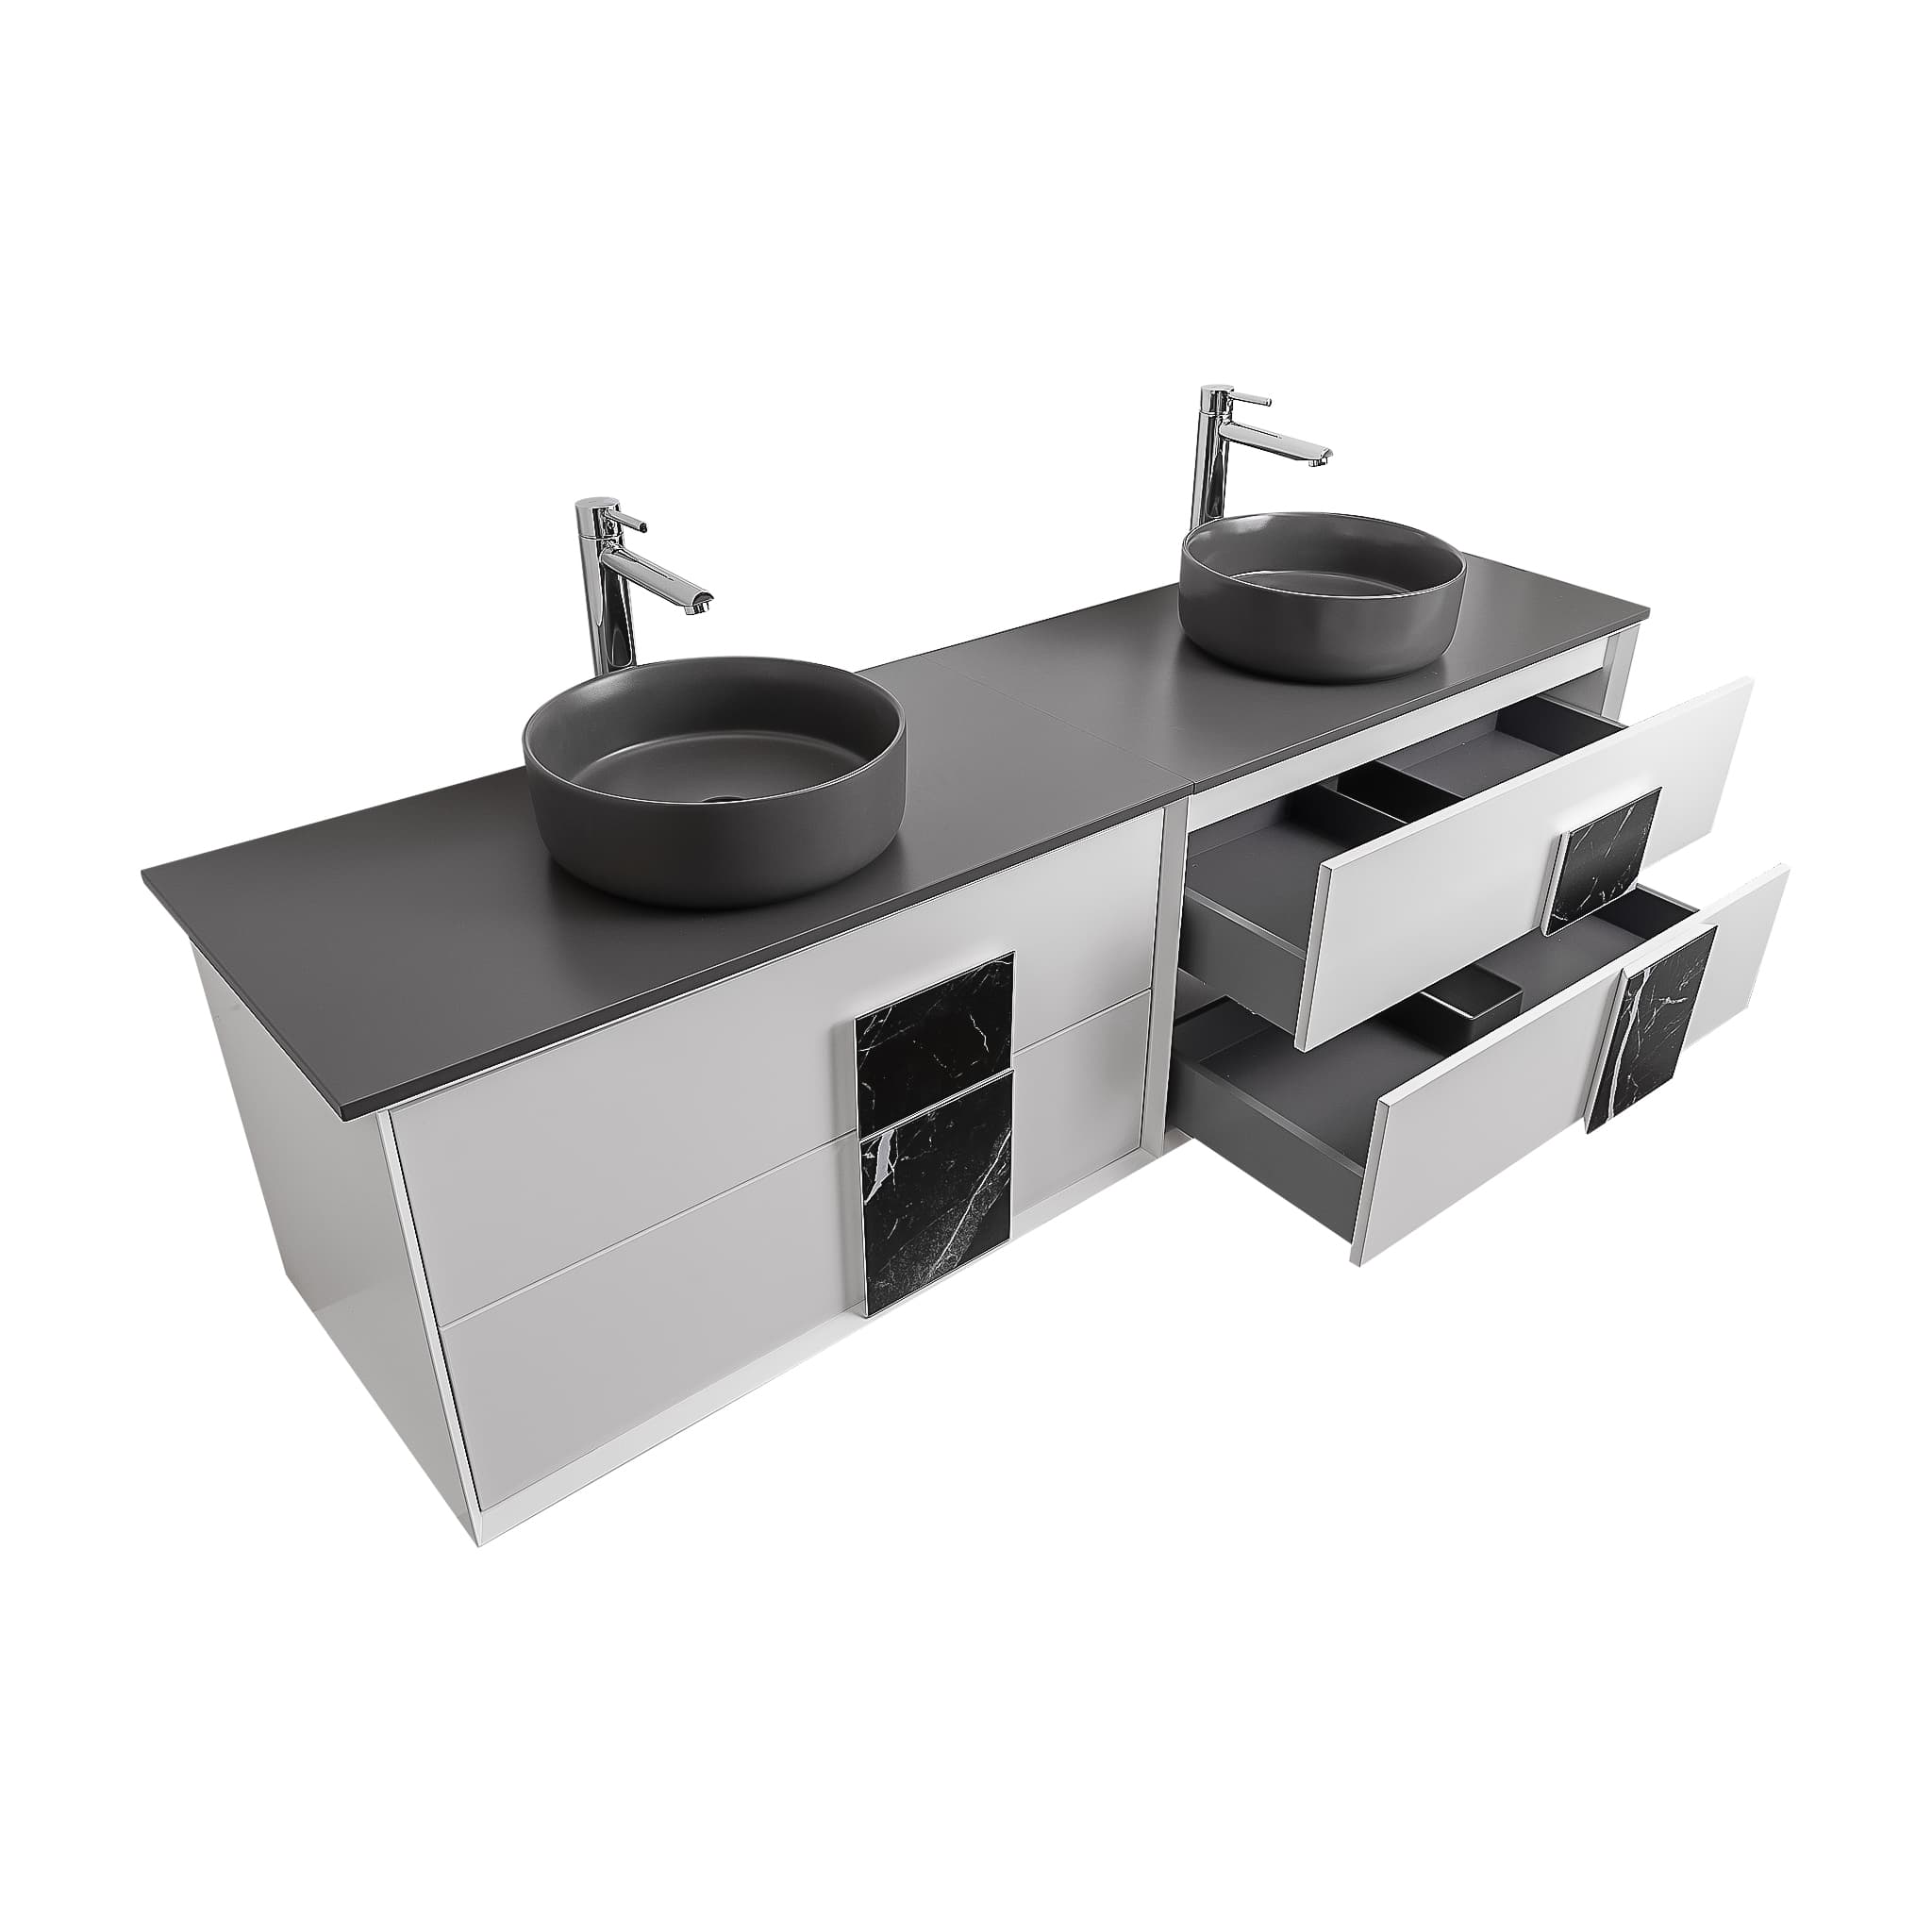 Piazza 63 Matte White With Black Marble Handle Cabinet, Ares Grey Ceniza Top and Two Ares Grey Ceniza Ceramic Basin, Wall Mounted Modern Vanity Set